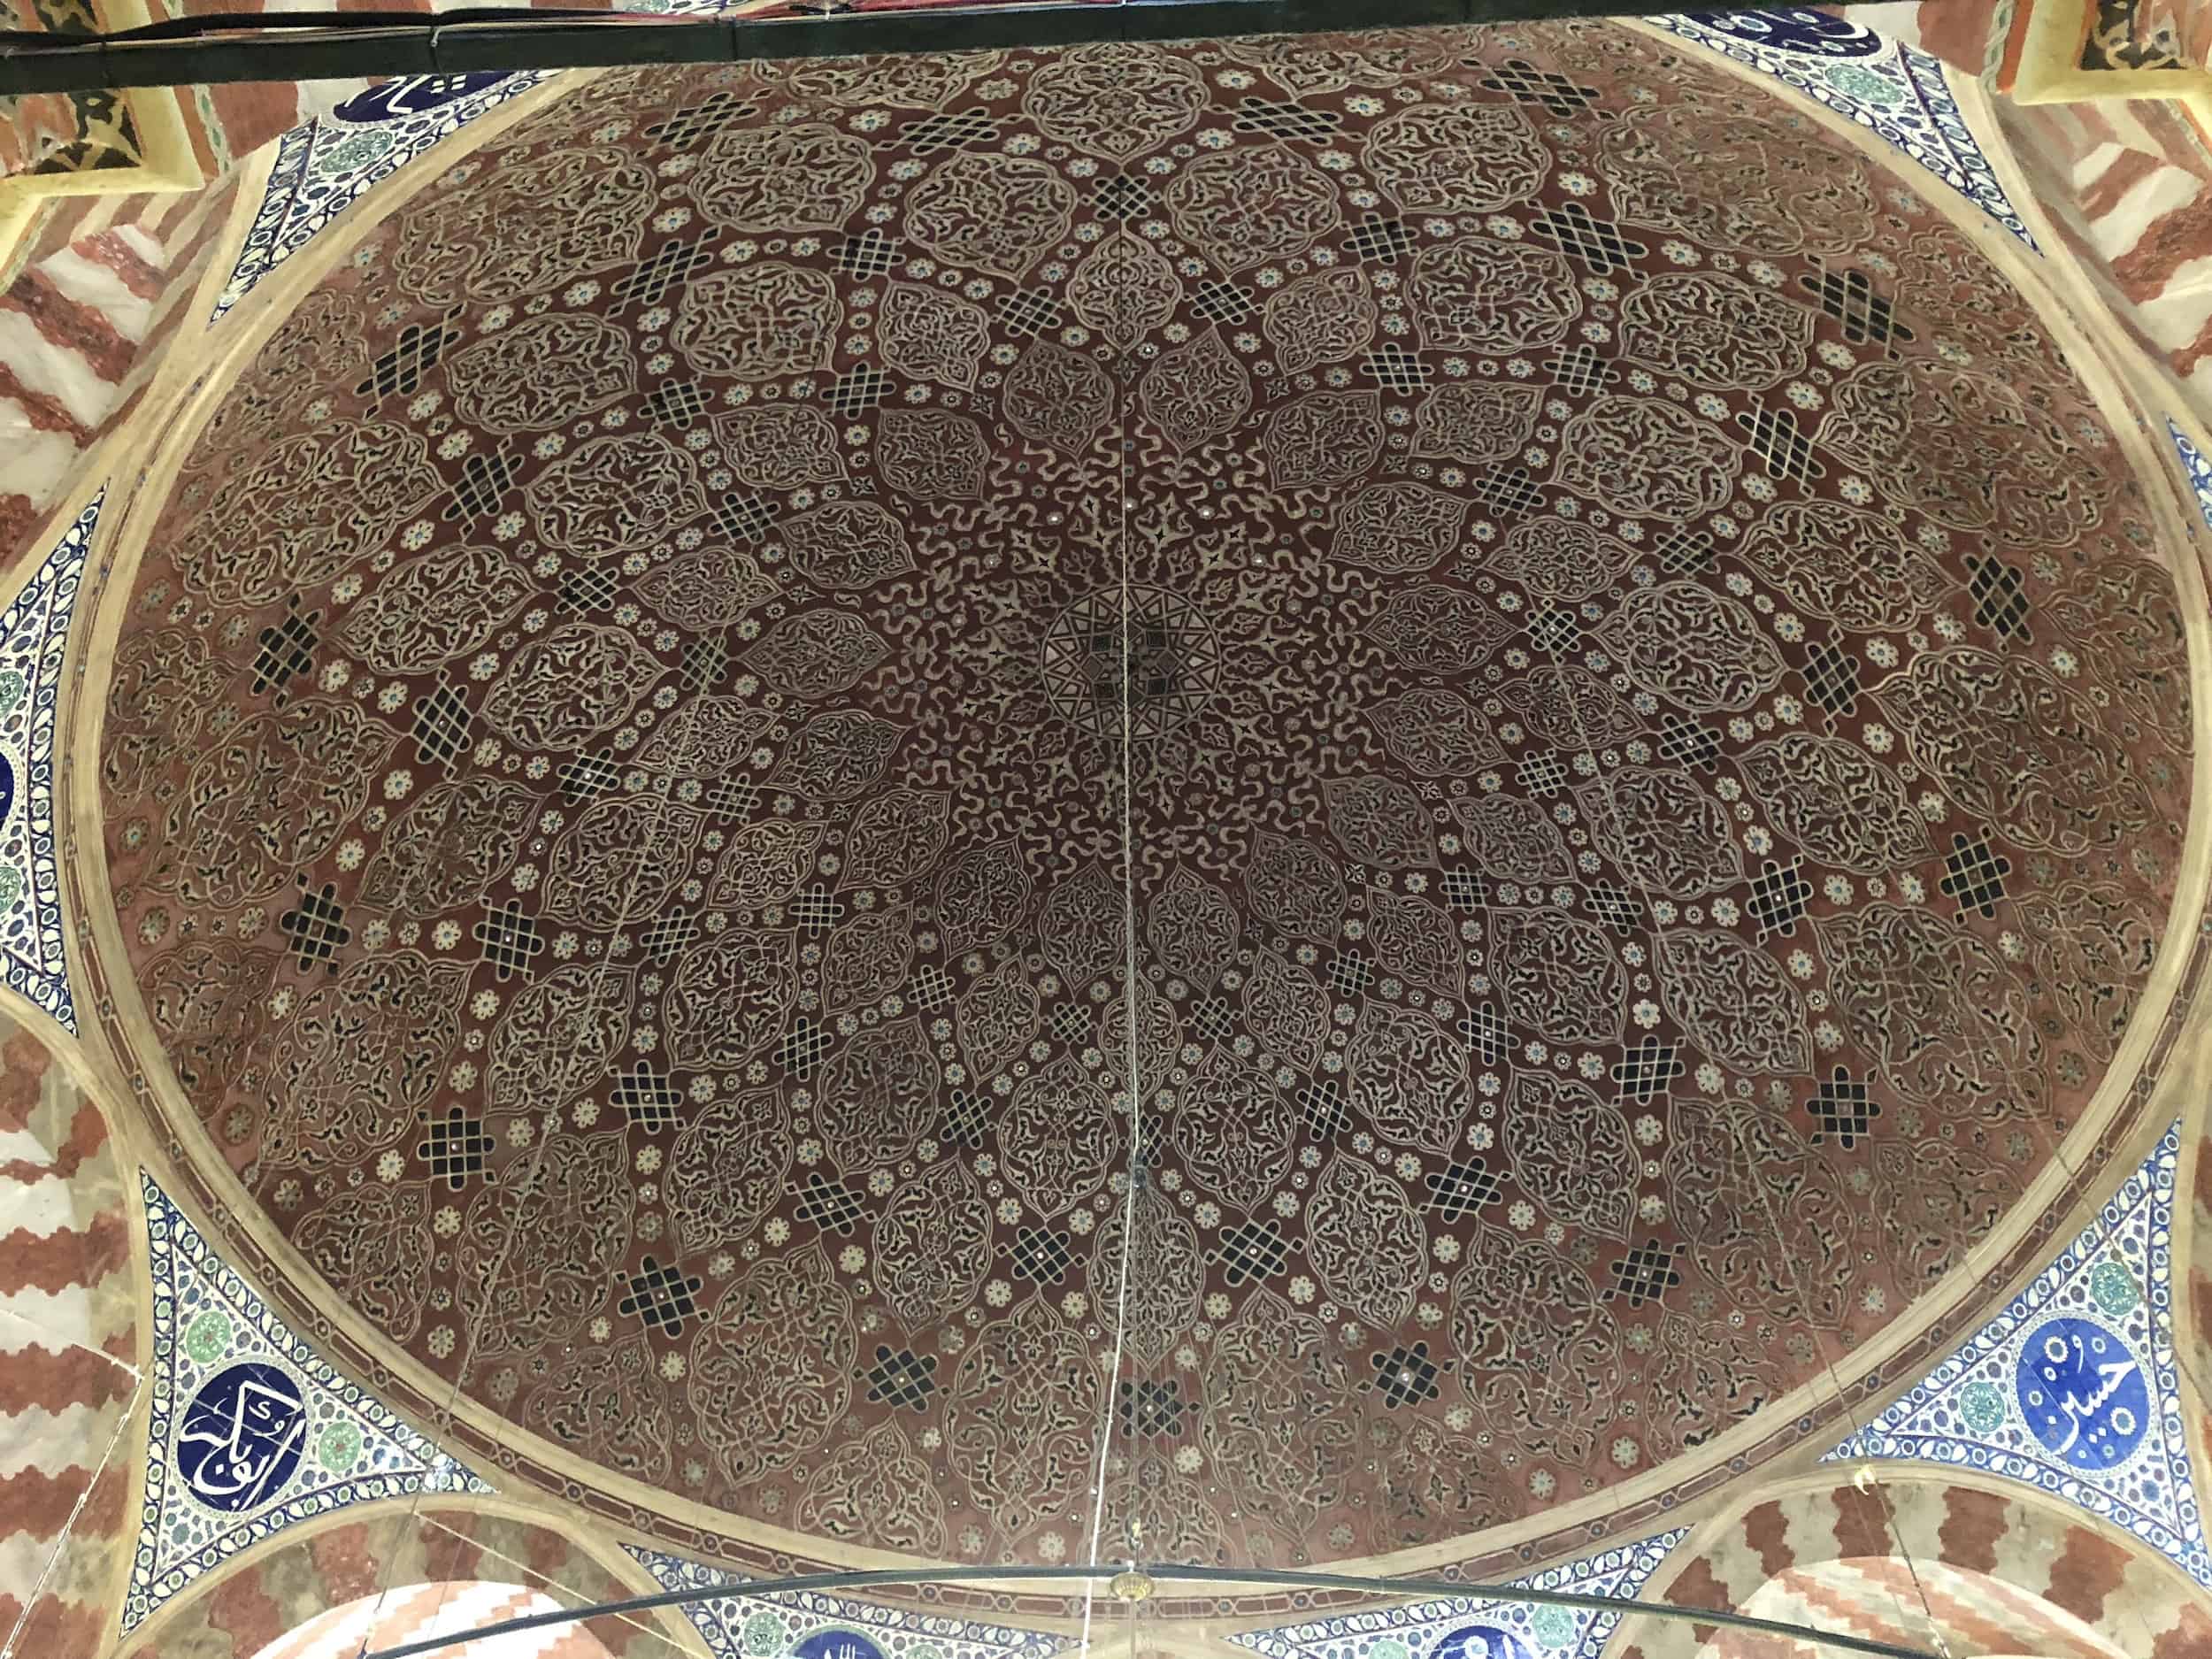 Dome at the Tomb of Süleyman the Magnificent at Süleymaniye Mosque in Istanbul, Turkey